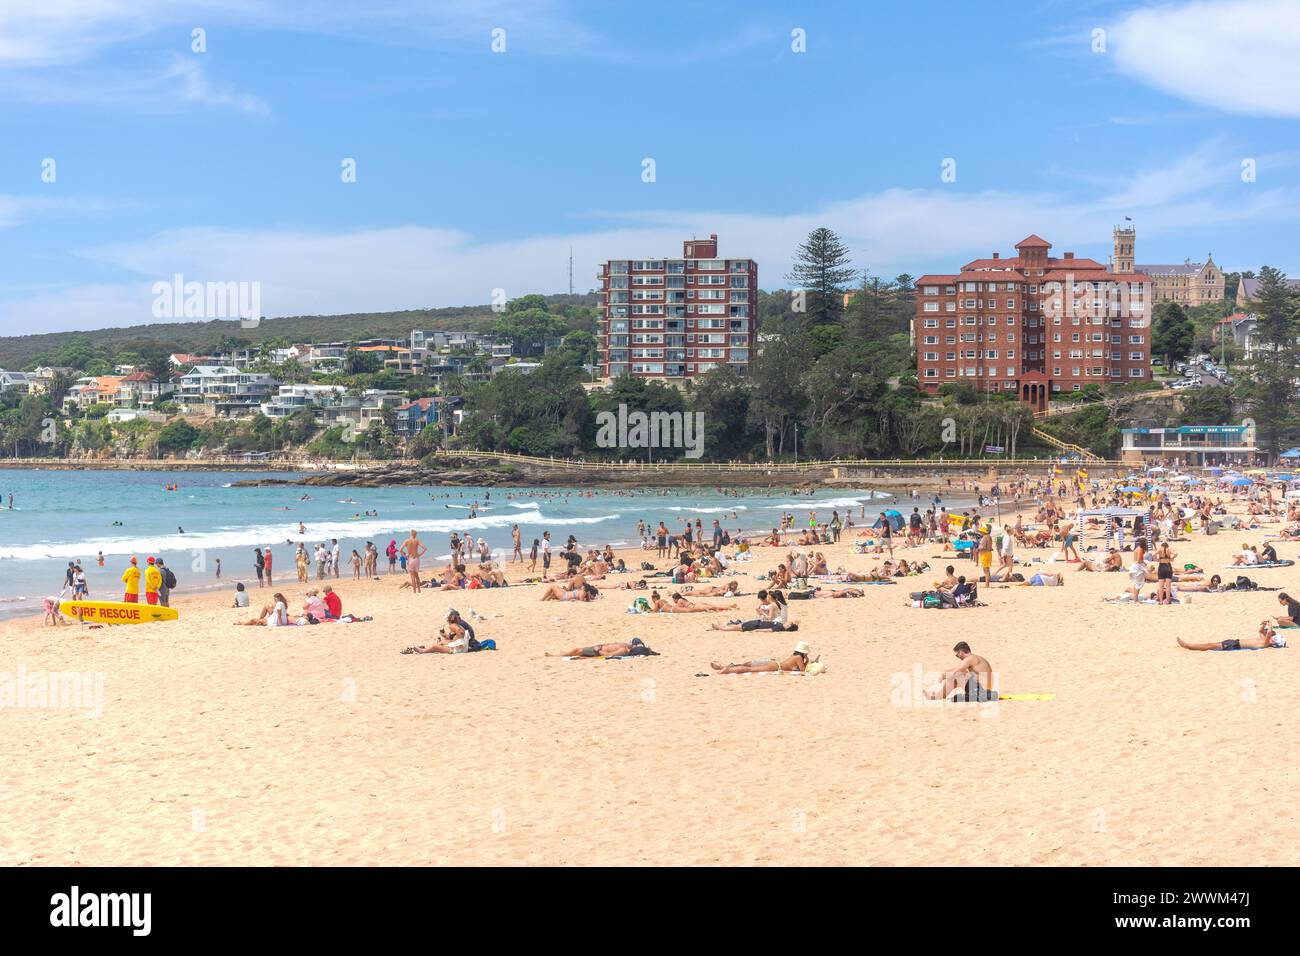 Manly Beach, Manly, North Sydney, Sydney, New South Wales, Australien Stockfoto